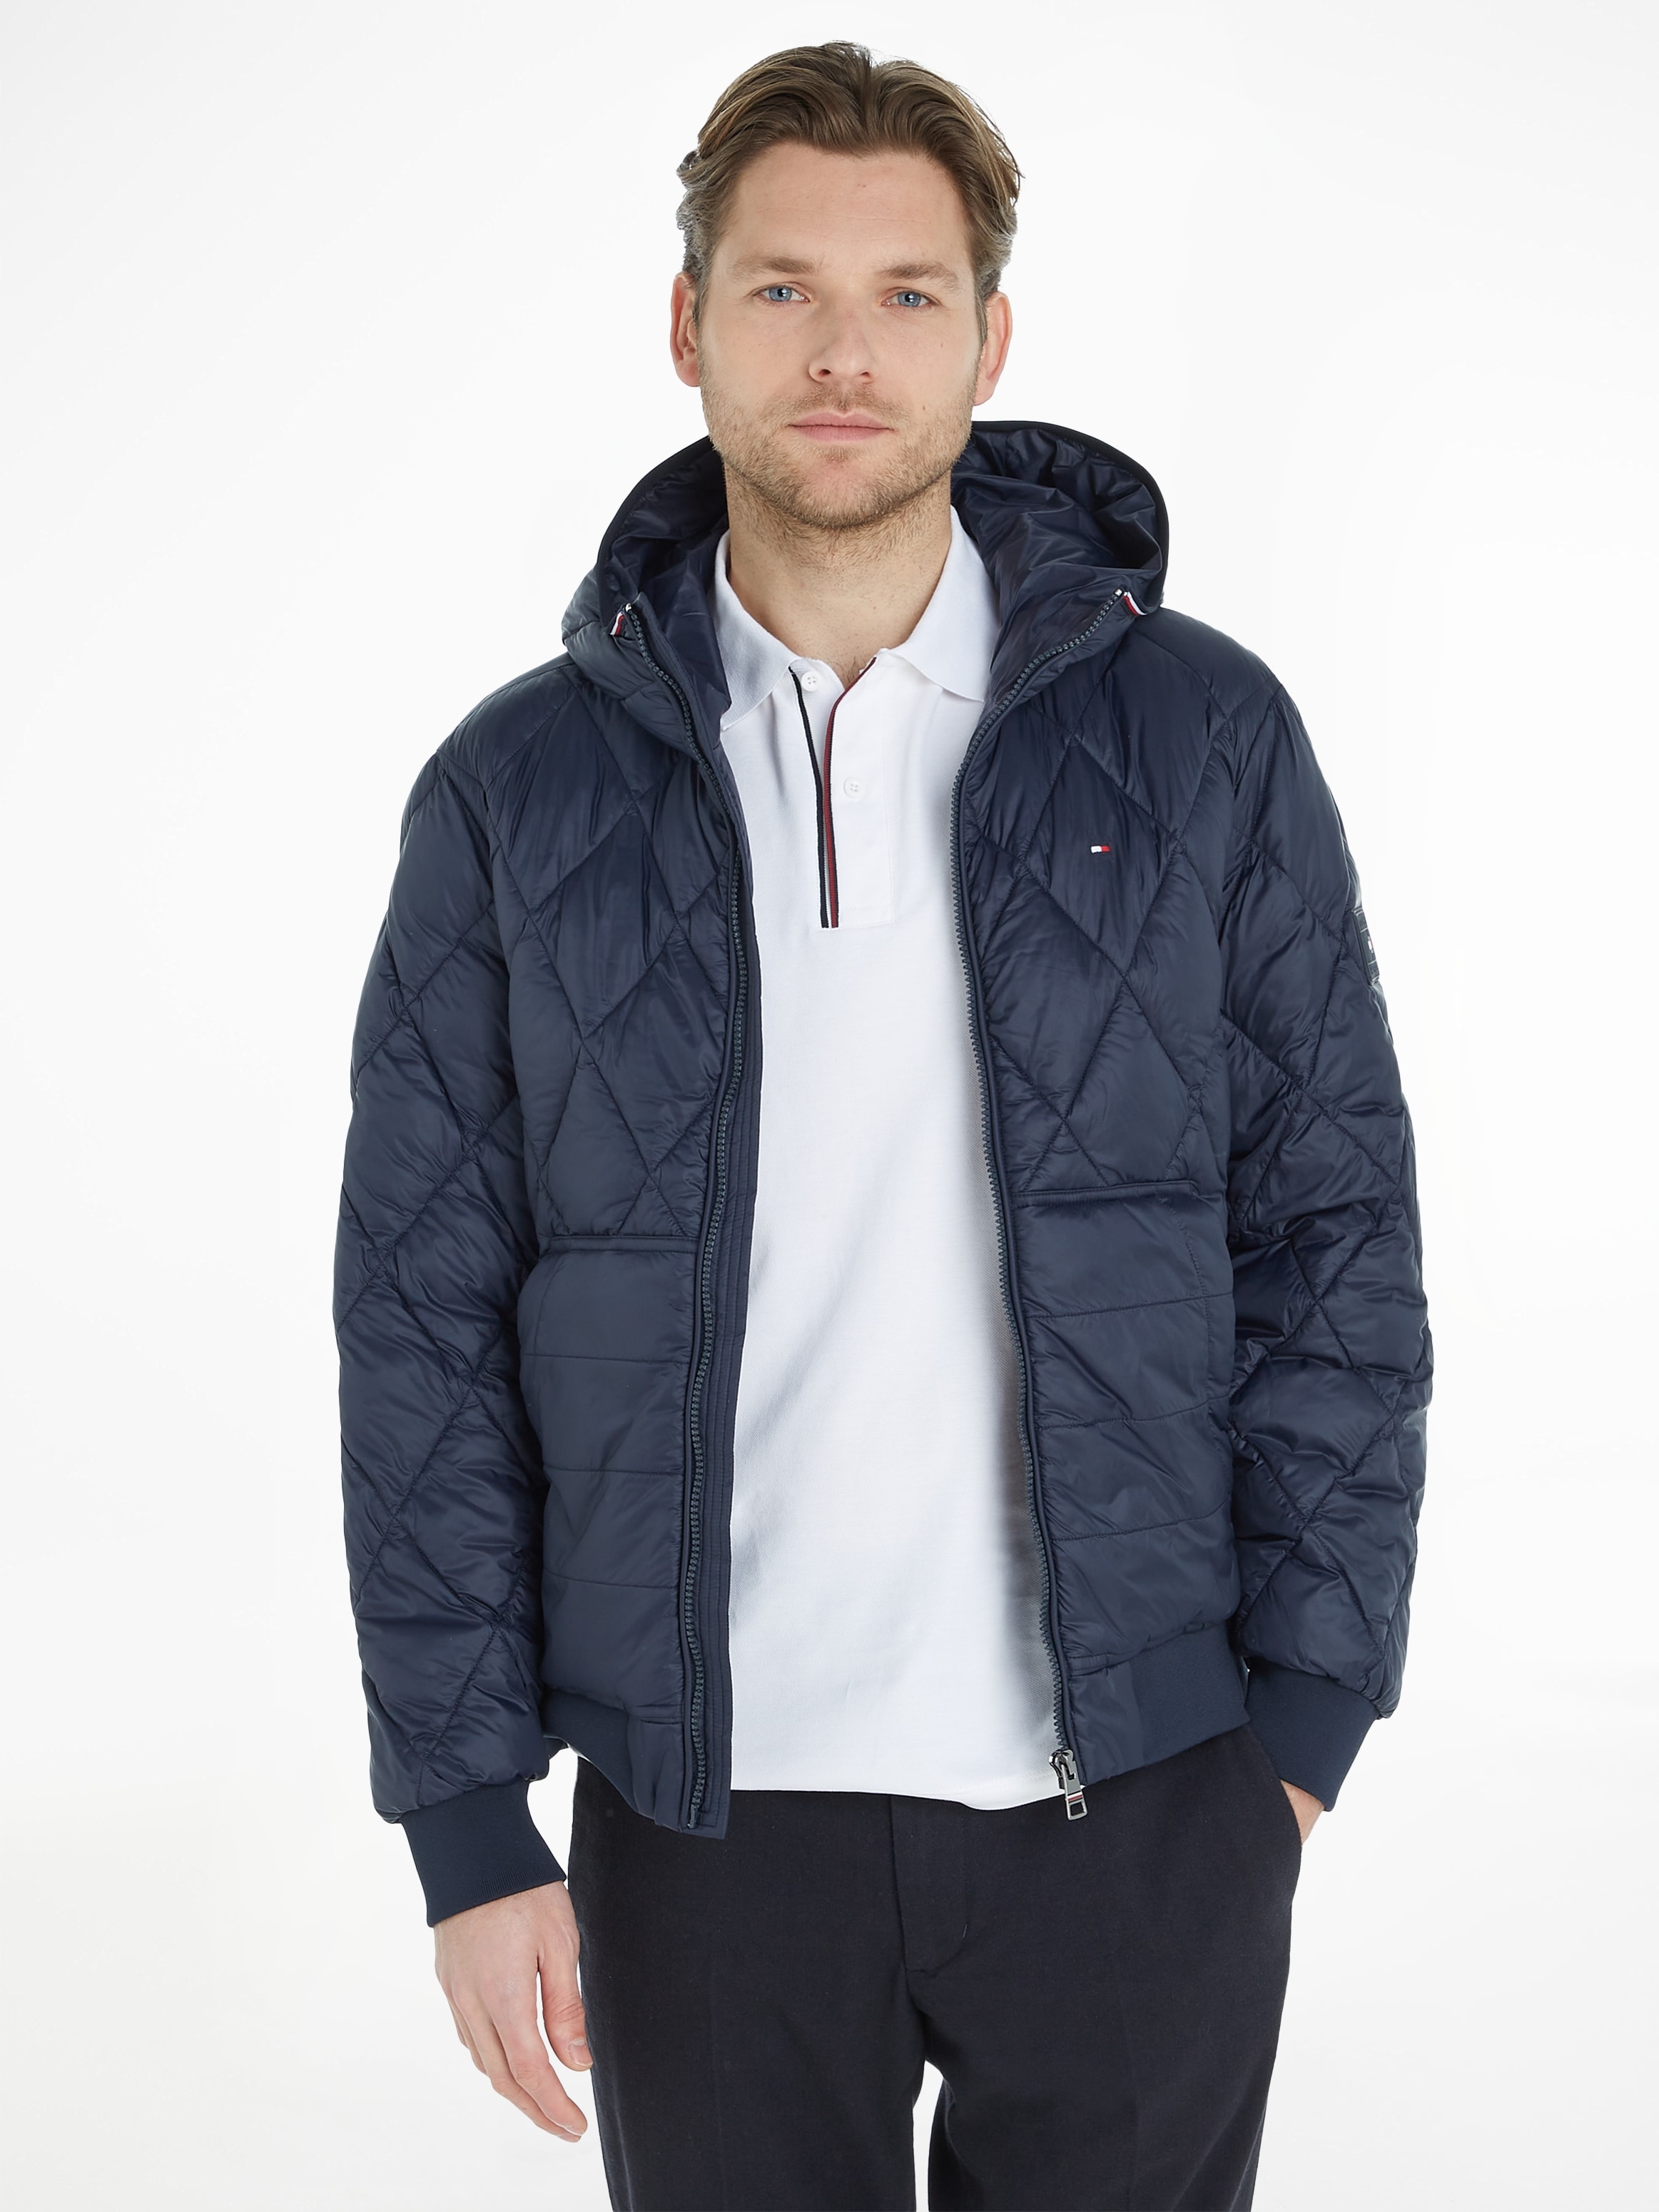 Tommy Hilfiger Steppjacke QUILT RECYCLED«, mit ♕ »MIX Kapuze bei